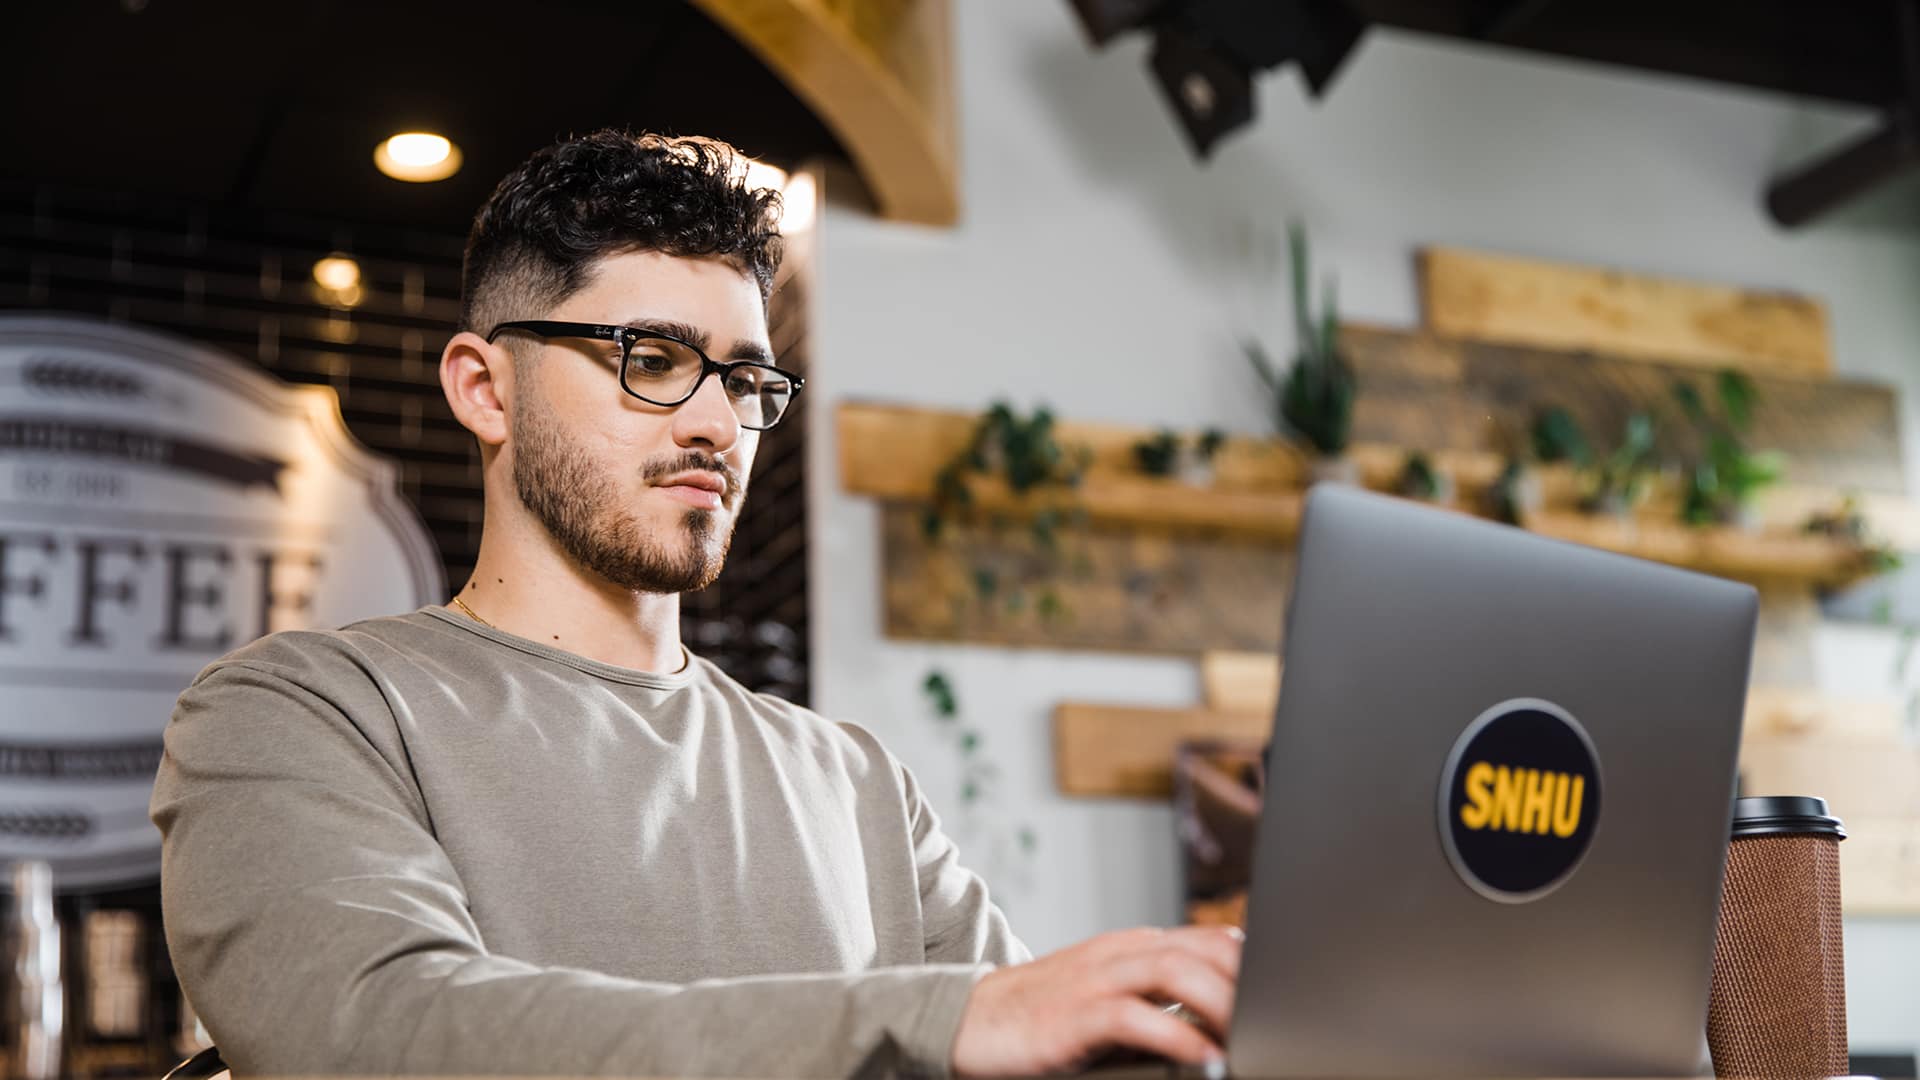 Naeem Jaraysi, an SNHU alum, wearing a grey sweatshirt in a coffee shop working on his laptop with an SNHU sticker on the front.